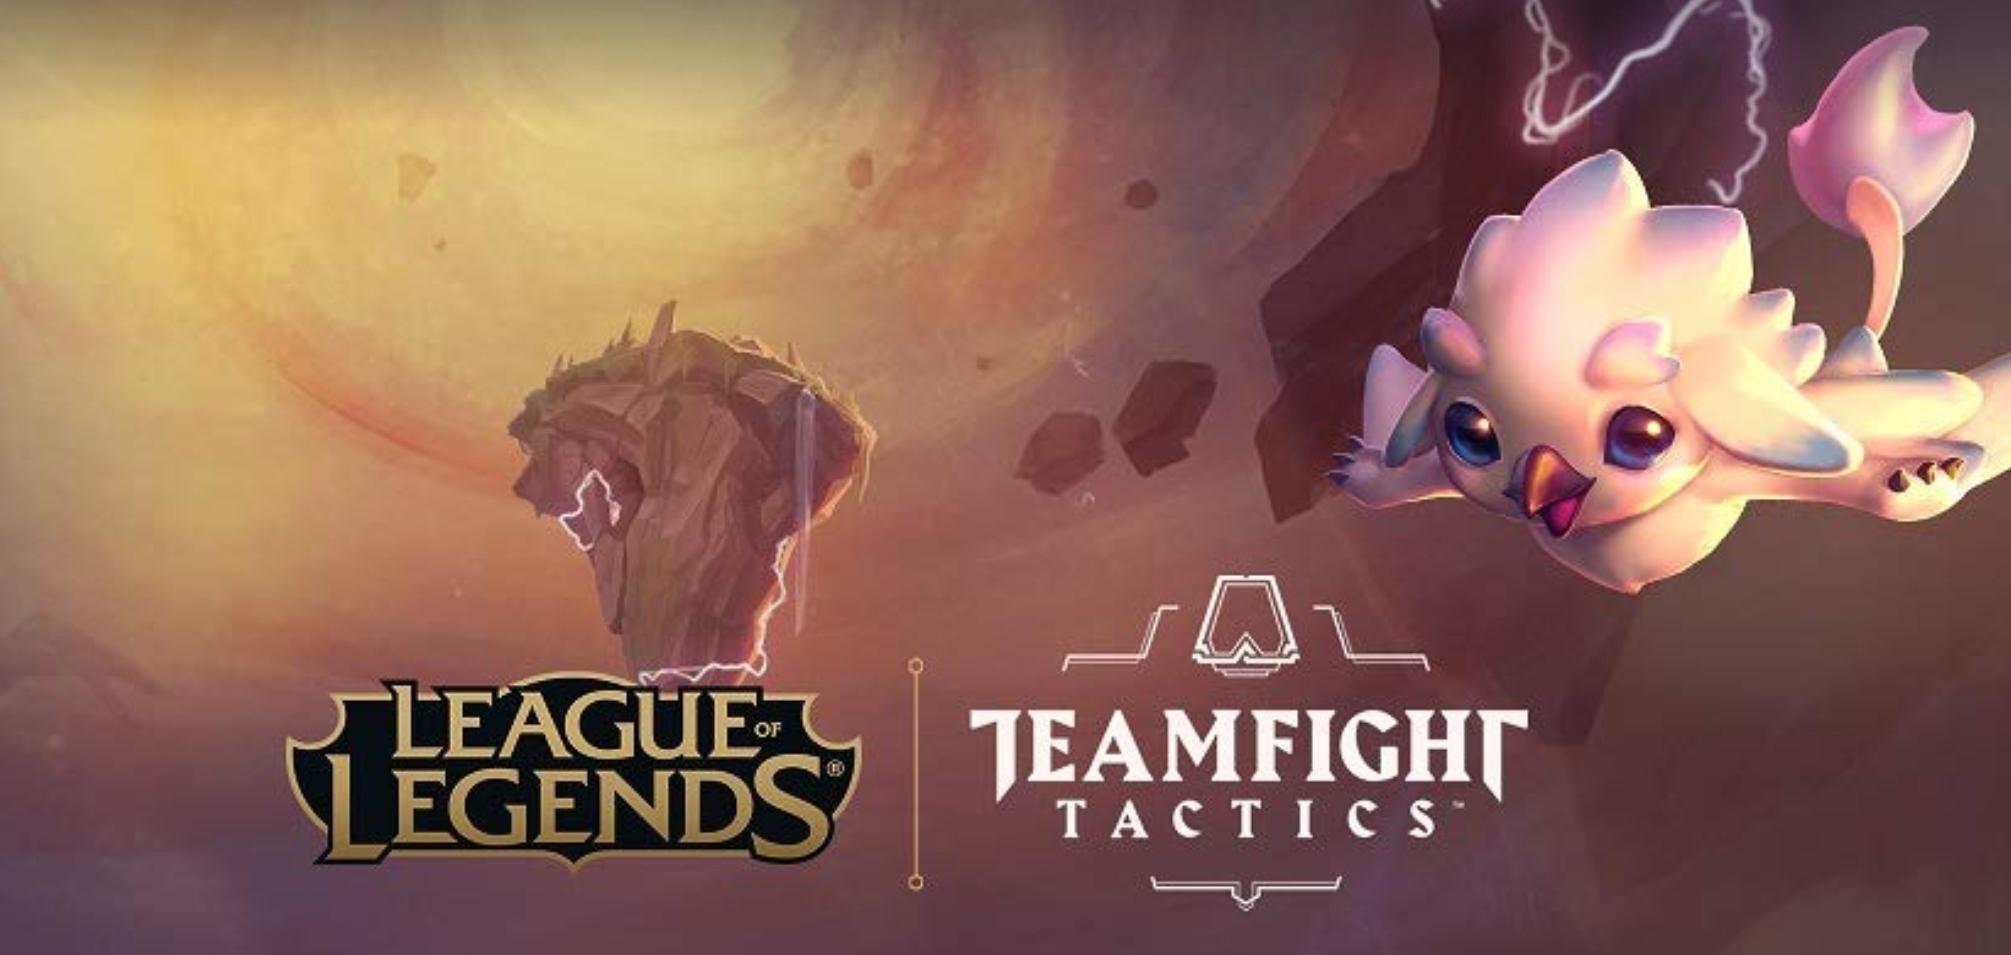 Prime Gaming on X: You can now gift #TwitchPrime @LeagueOfLegends  Teamfight Tactics loot with the new Loot Gifting benefit, featuring a  special Little Legends Twin Egg! 🥚🥚🐣 Learn more about Loot Gifting -->